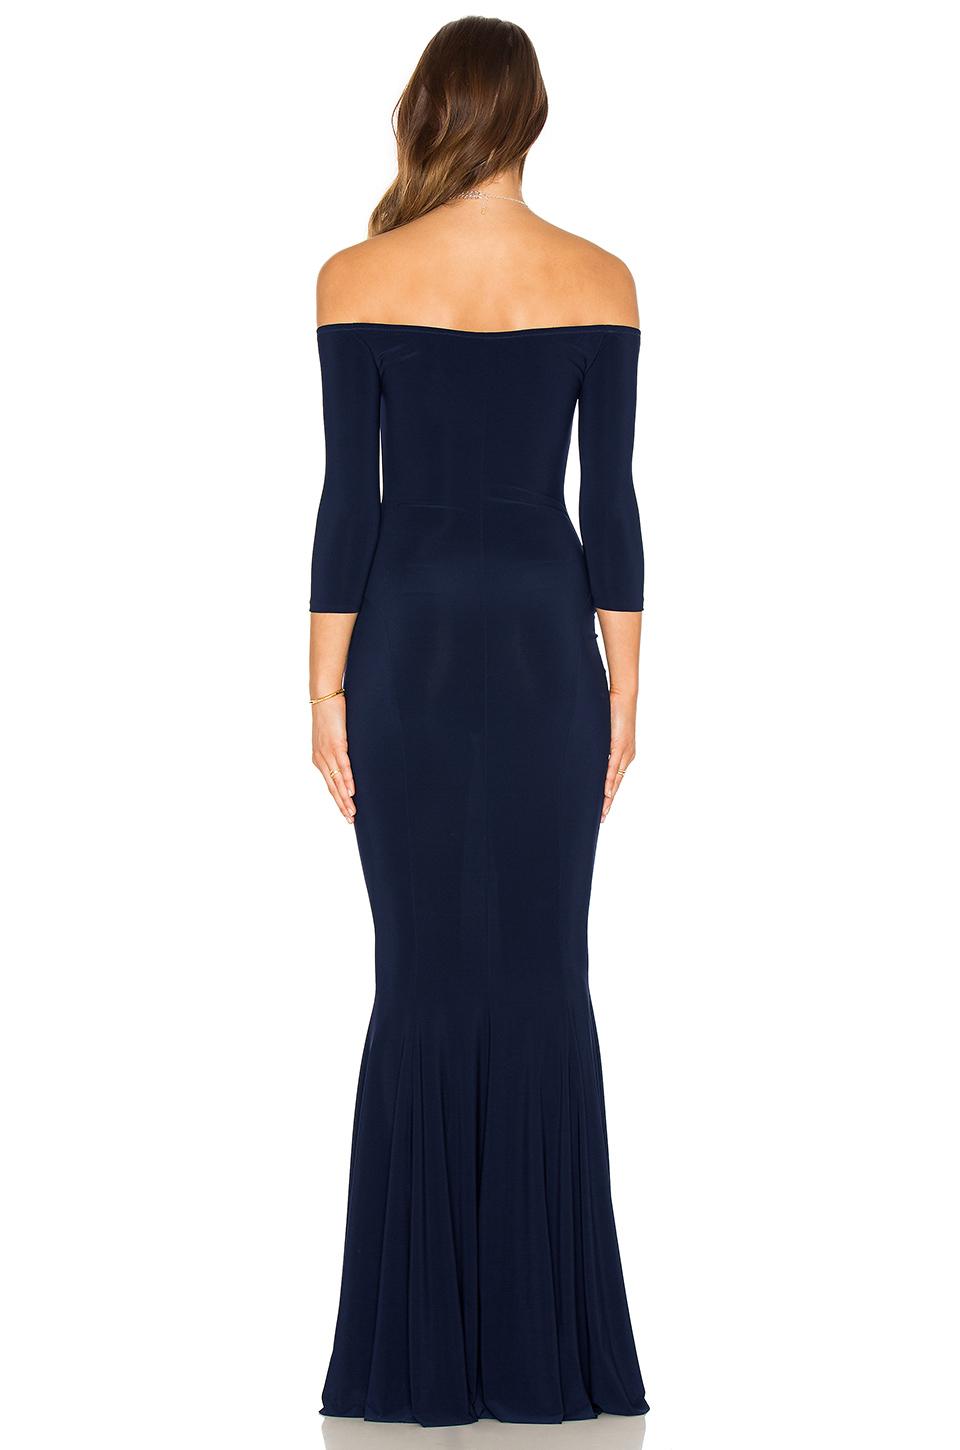 Norma Kamali Off The Shoulder Fishtail Gown - Lyst